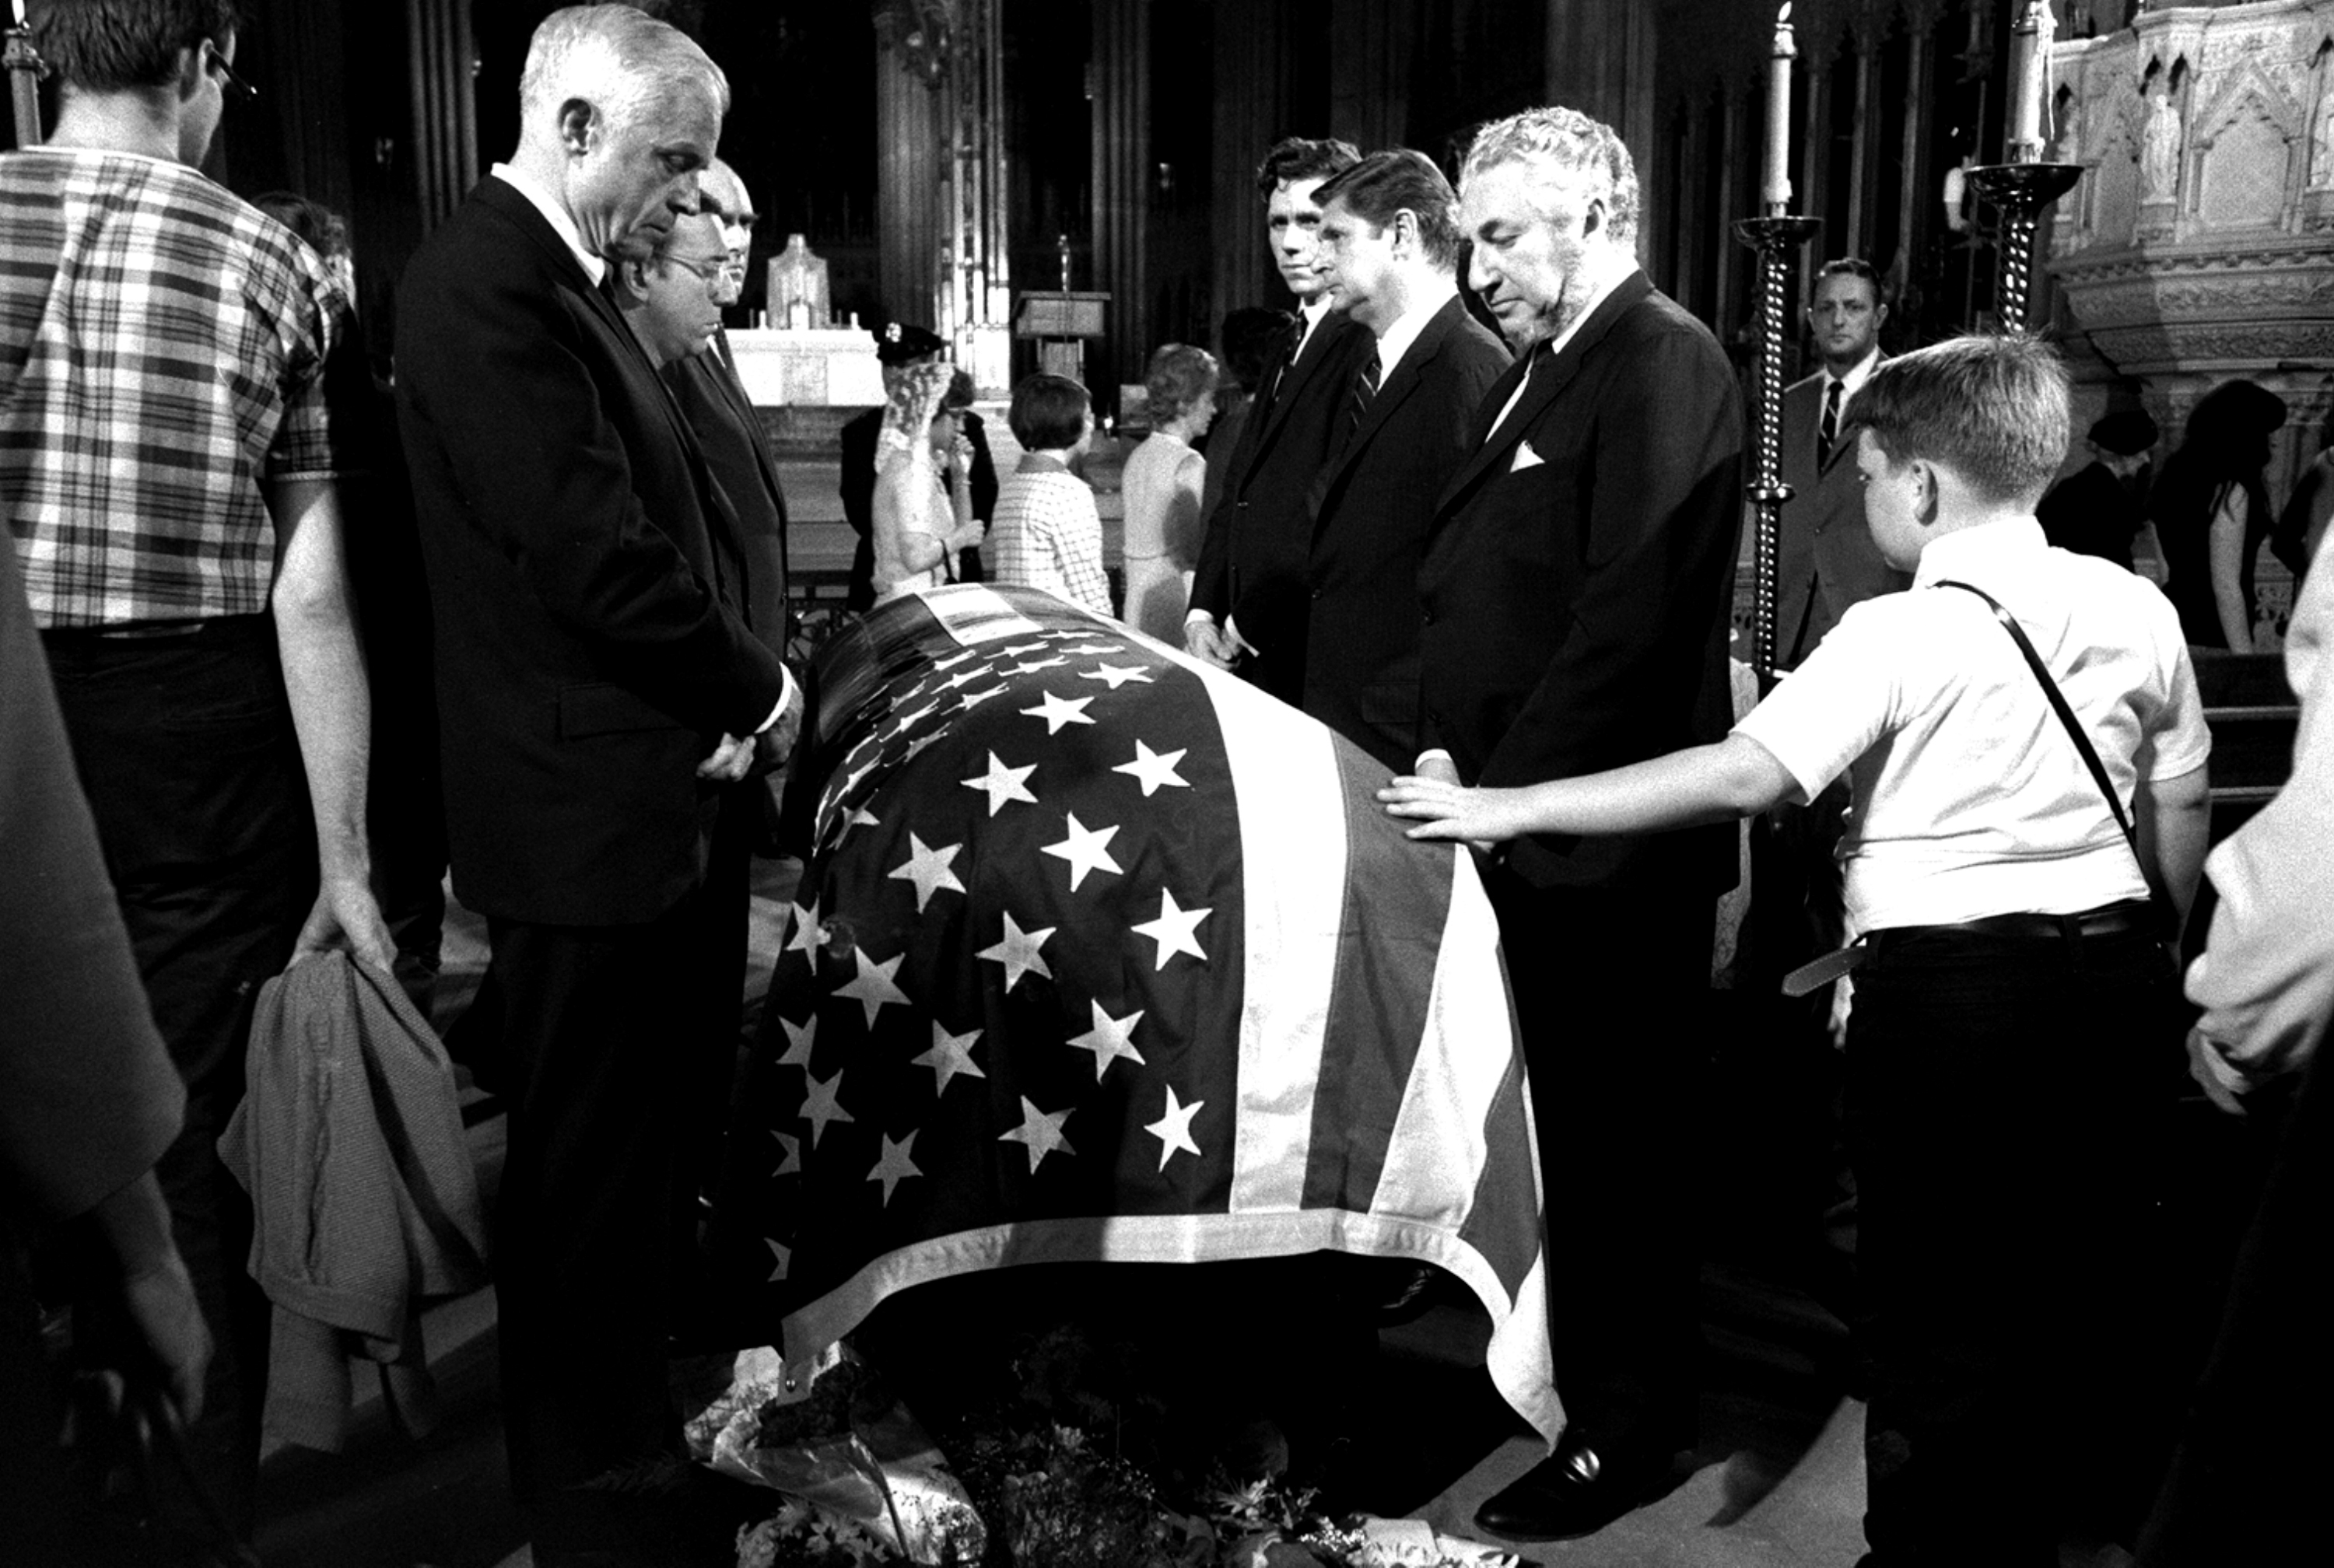 FILE-- In this June 7, 1968 file photograph, a young boy touches the casket of Senator Robert F. Kennedy, D-NY, while paying respects at New York's St. Patrick's Cathedral. The suburban Boston house where Robert F. Kennedy was born, now a national historic site in tribute to his more famous brother, President John F. Kennedy, is holding a special exhibition to mark the 50th anniversary of RFK's assassination on June 6, 1968. (AP Photo/stf)